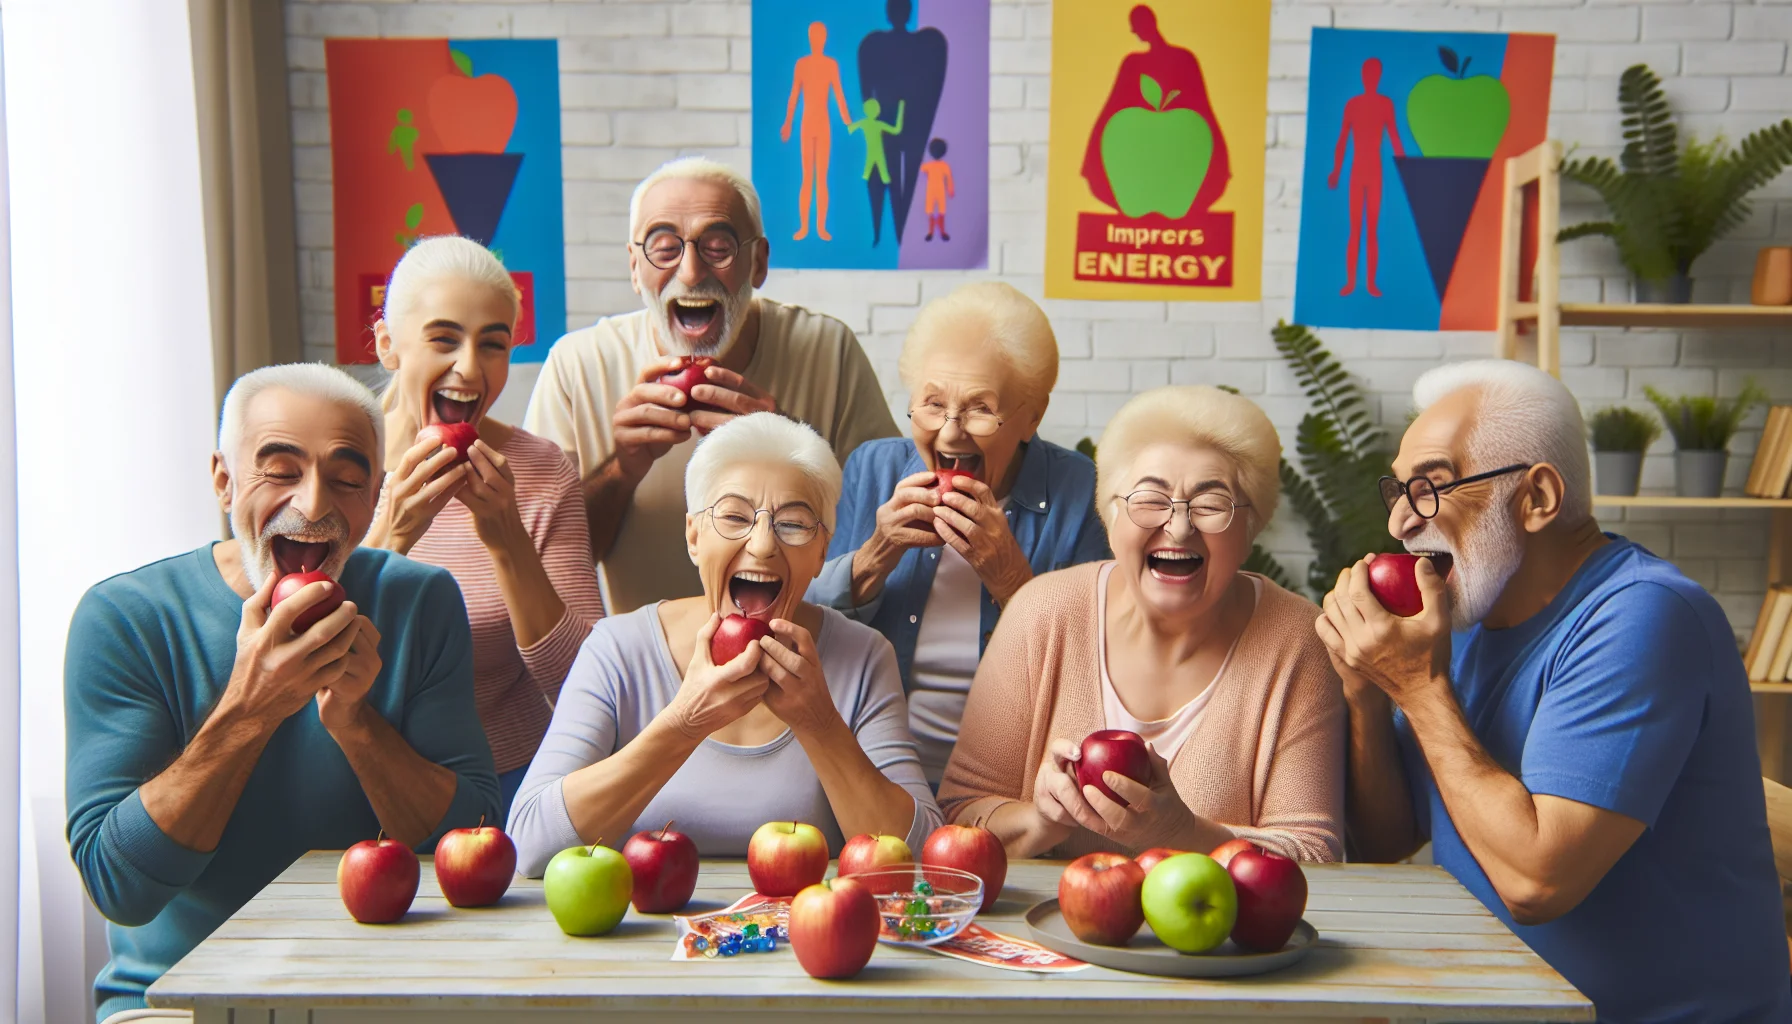 Craft an amusing yet grounded scene which represents the concept that apples impart energy. The setting is a lively senior citizens shared home, where a group of cheerful elderly individuals of various descents including Hispanic, Caucasian, Middle Eastern and South Asian are enthusiastically participating in a lively apple-eating contest. Surrounded by colorful posters promoting healthy diet choices, they are animatedly crunching through bright red apples. Their expressions are a mix of joviality and surprise as they find themselves feeling re-energized after every delicious, energy-packed bite.